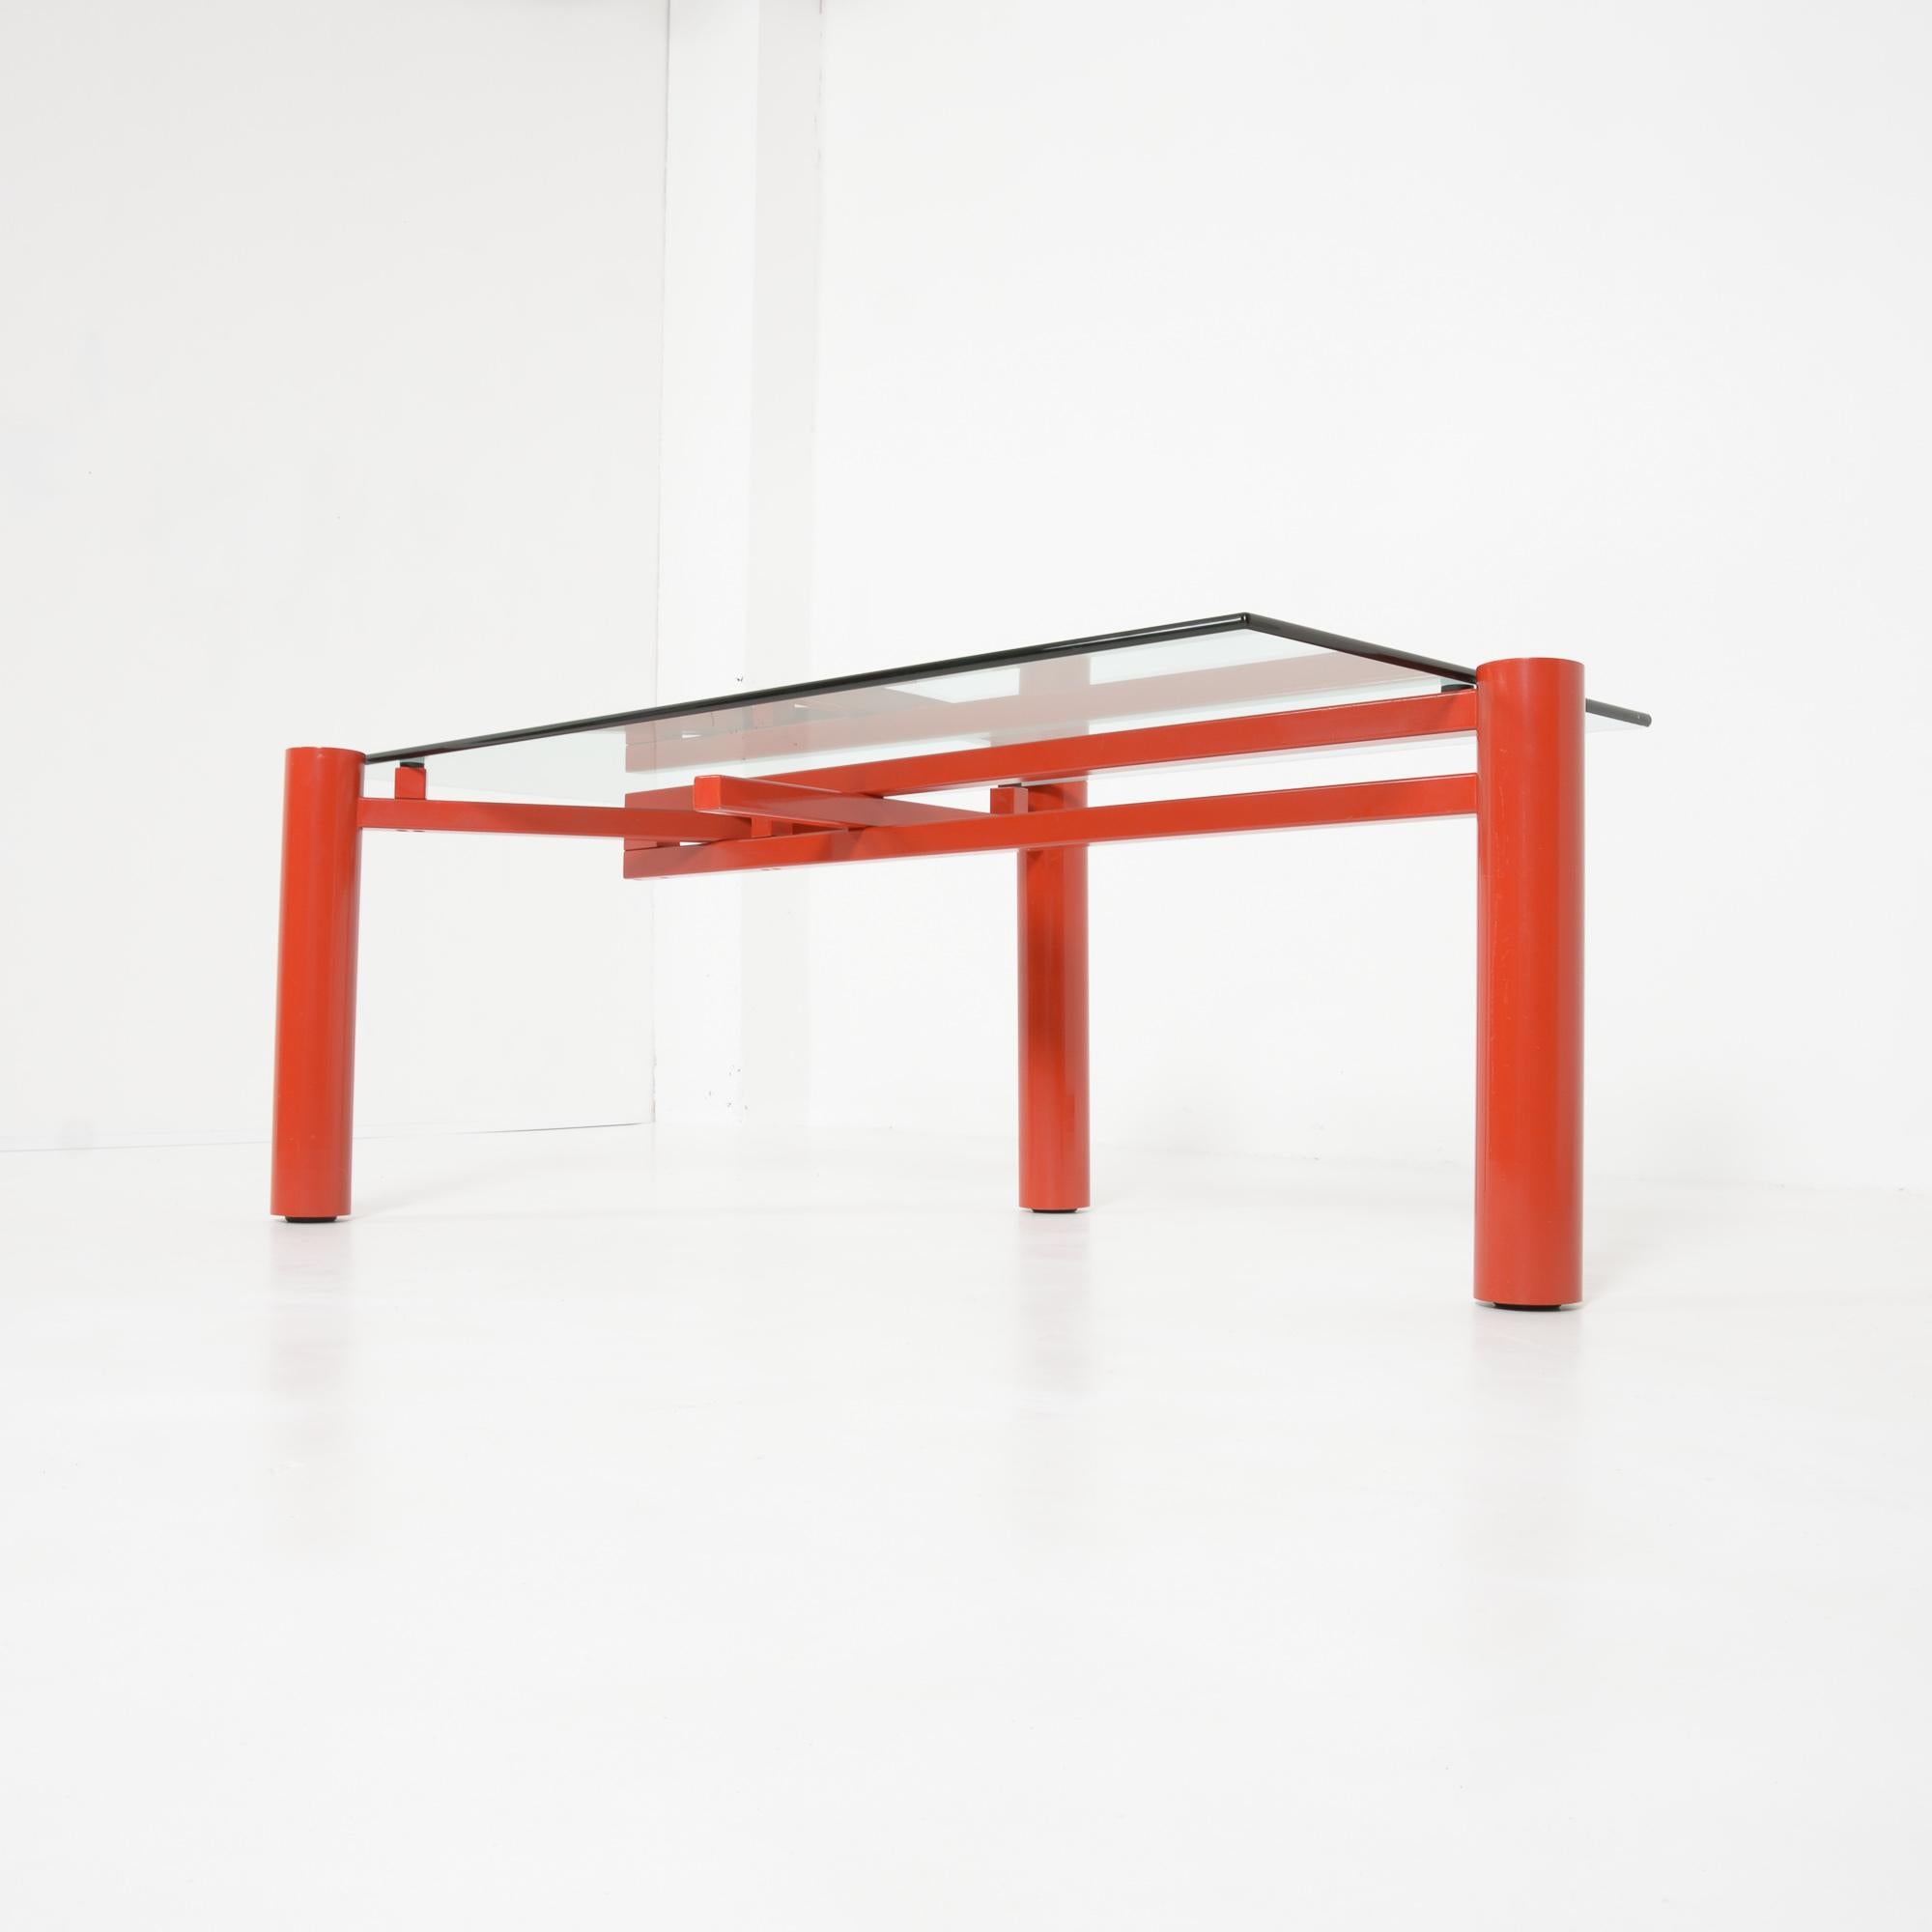 Constructivist Dining Table by Christophe Gevers 10